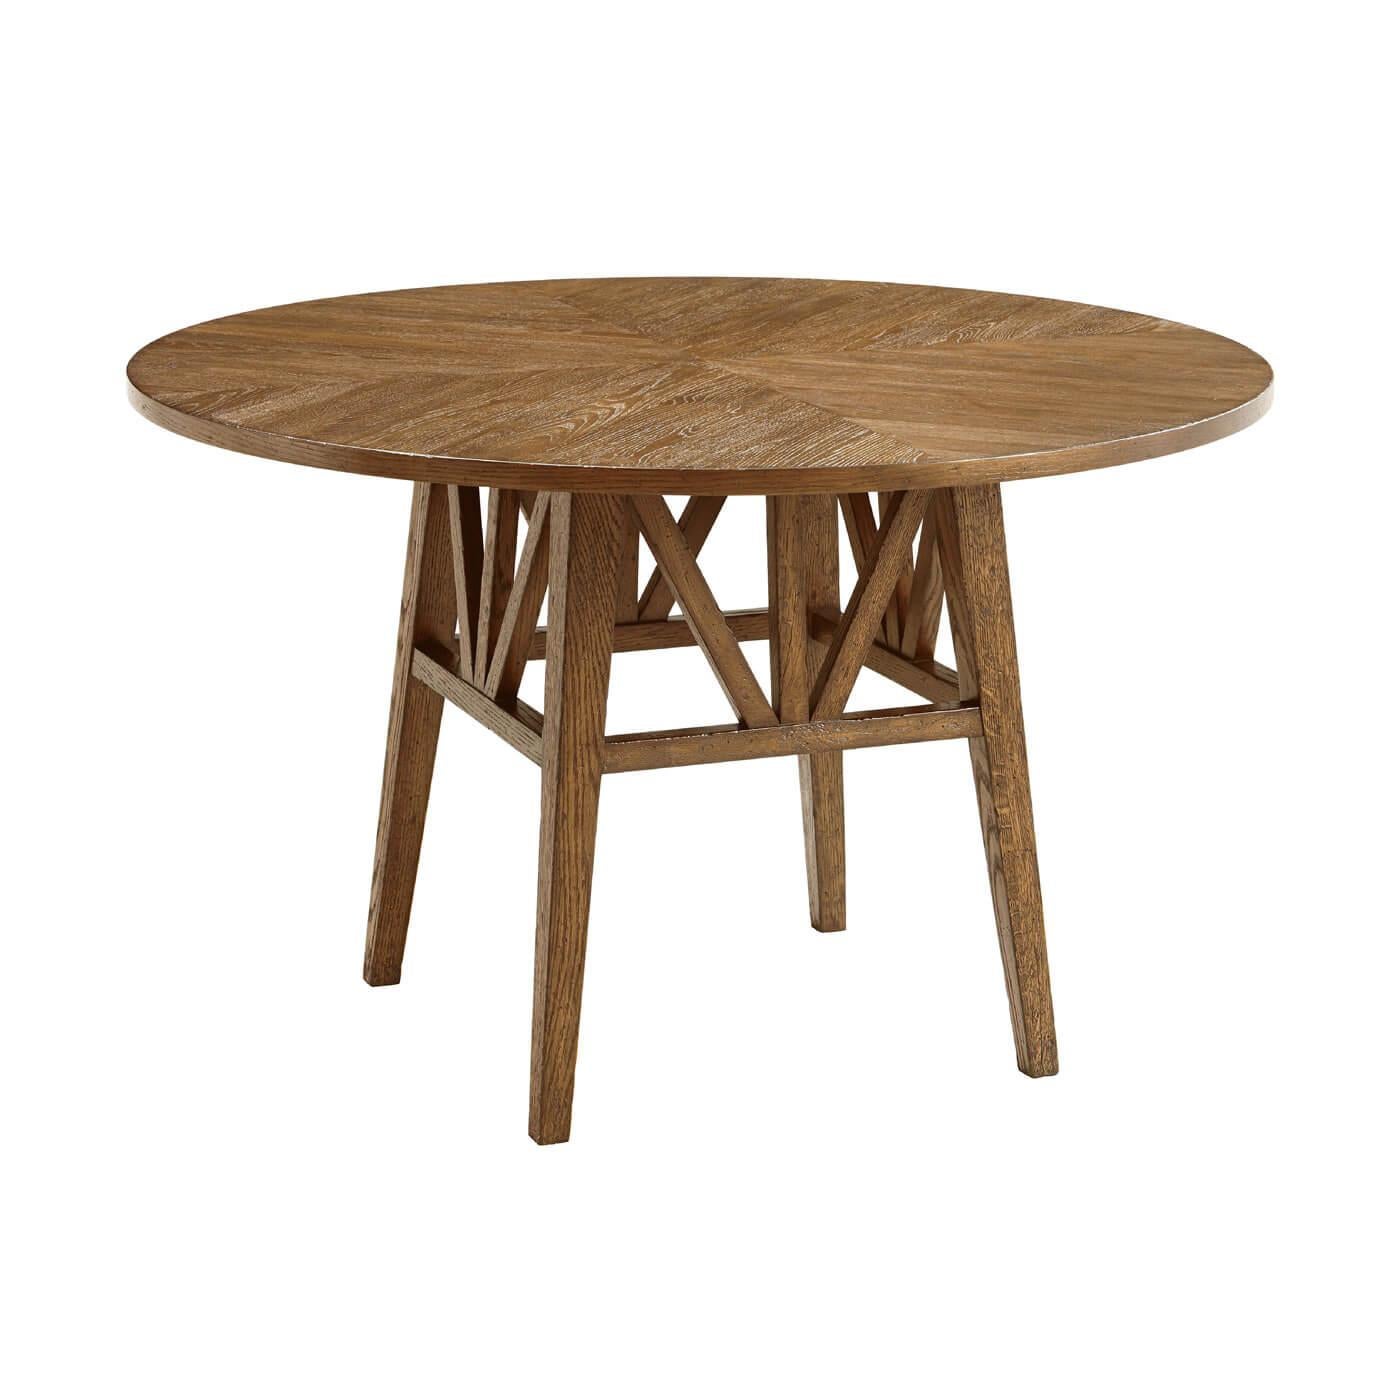 Contemporary Rustic Oak Round Dining Table For Sale